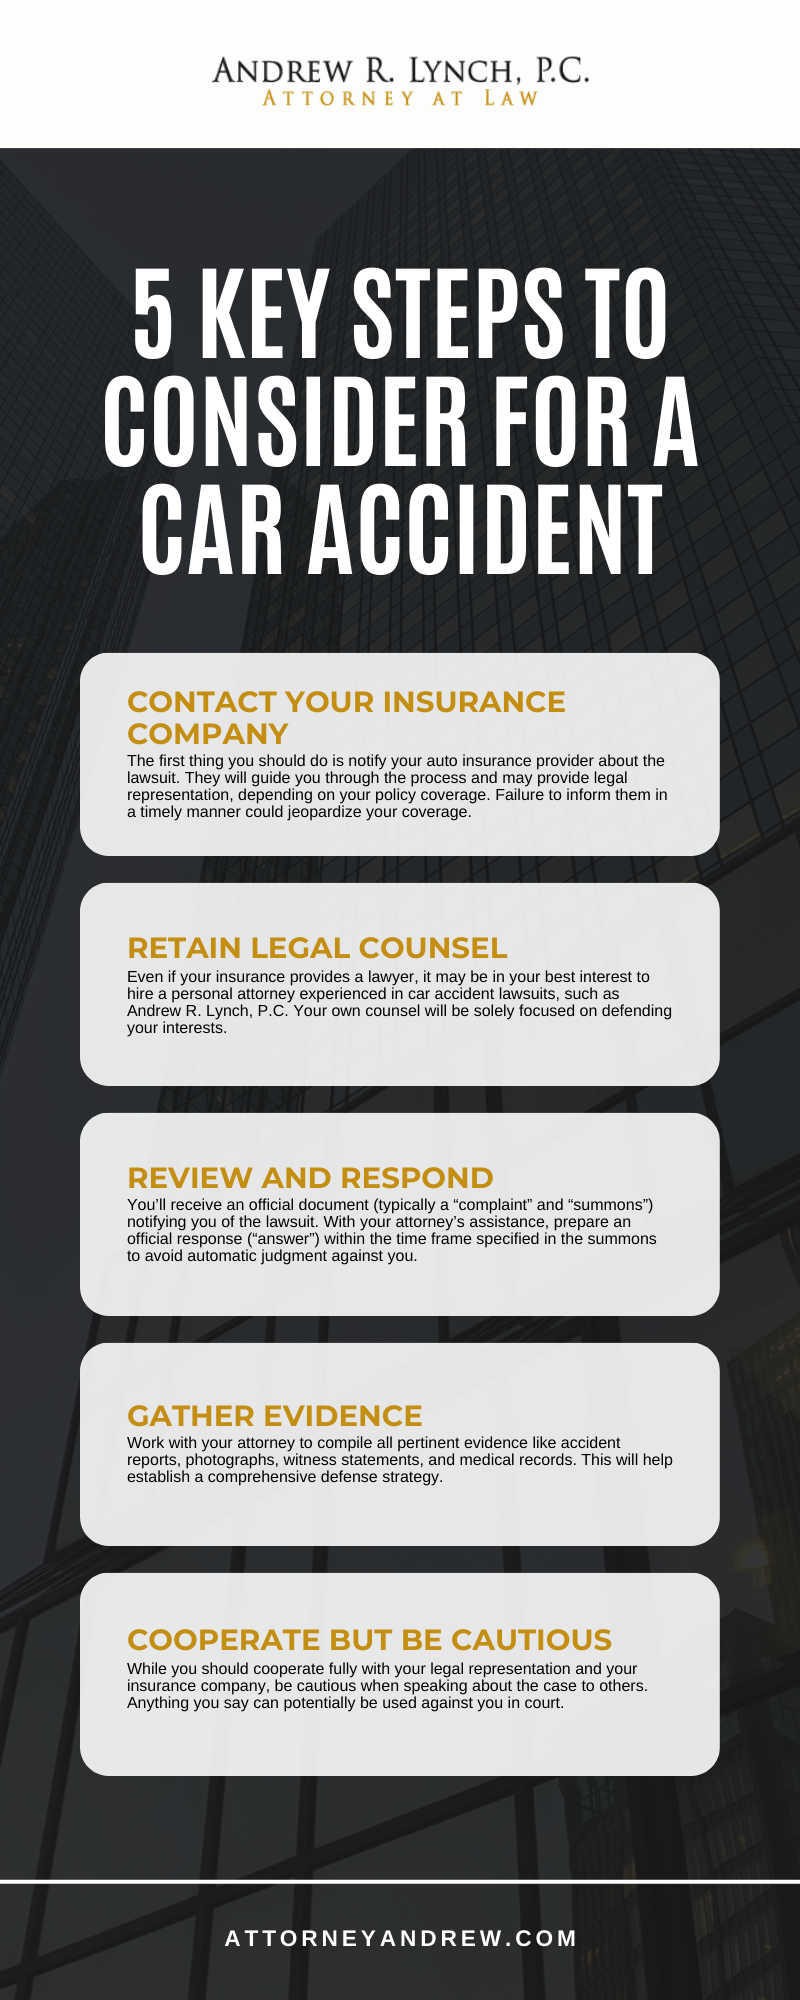 5 Key Steps To Consider For A Car Accident Infographic